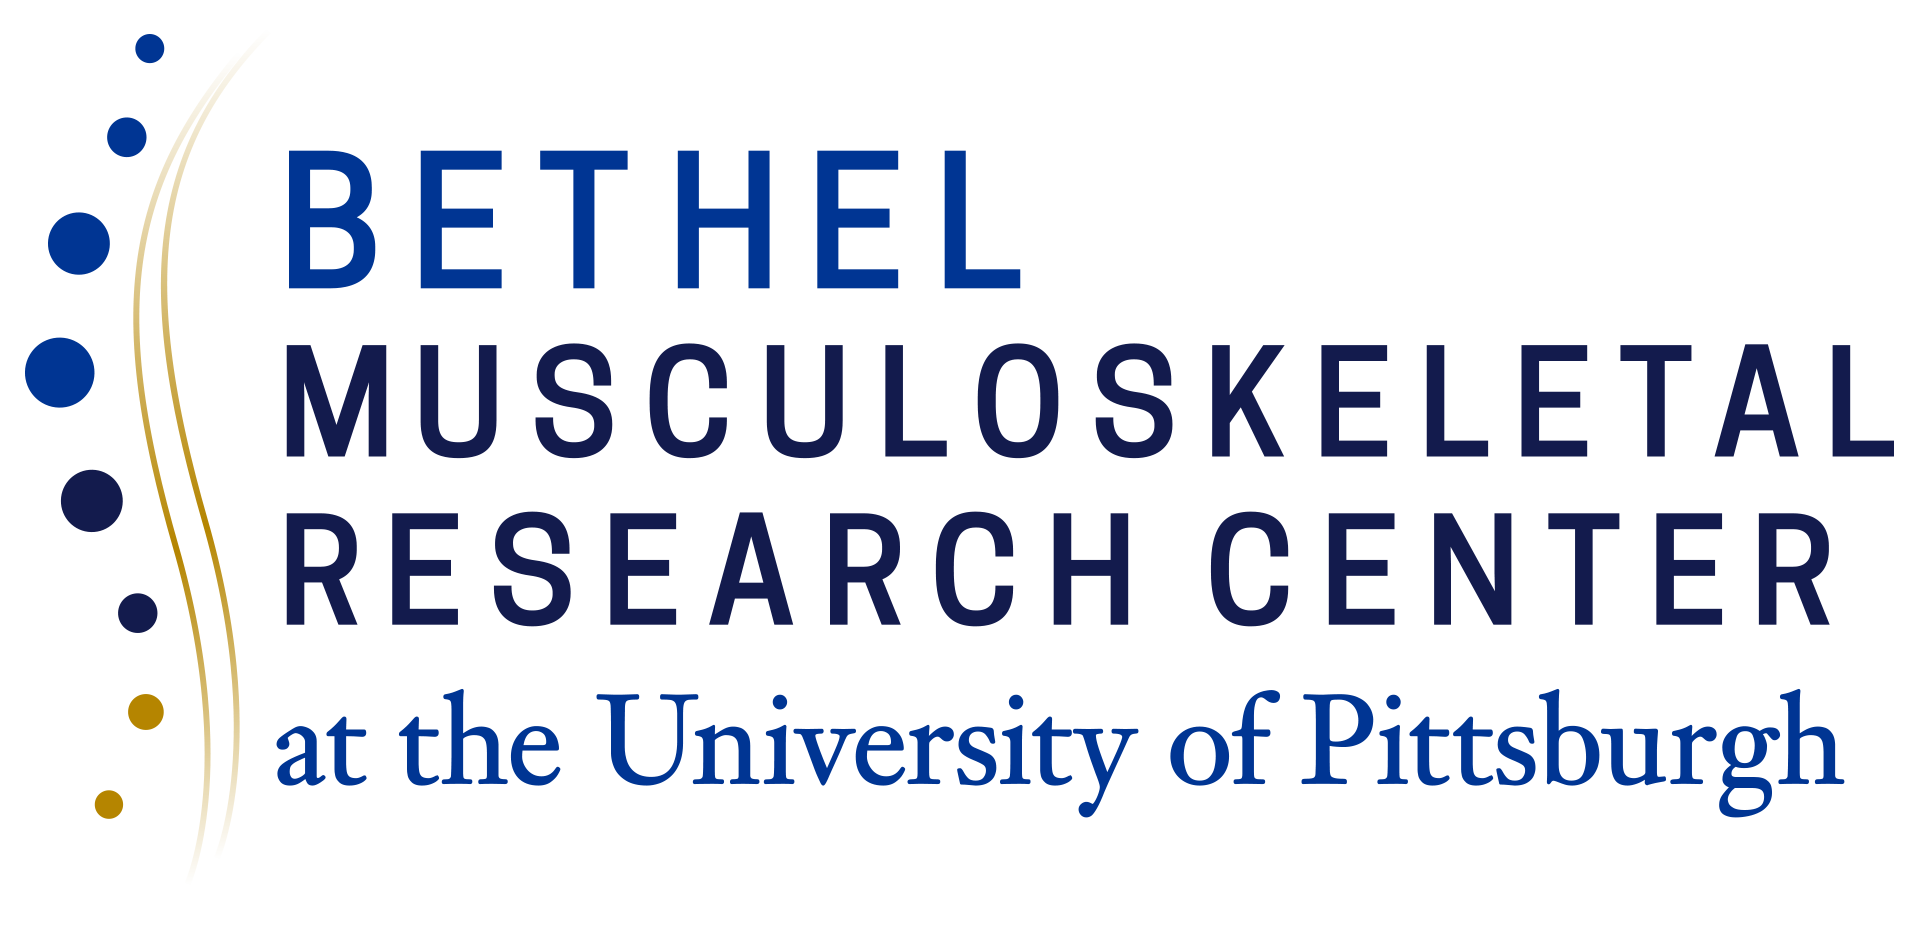 The Orland Bethel Family Musculoskeletal Research Center at the University of Pittsburgh logo.